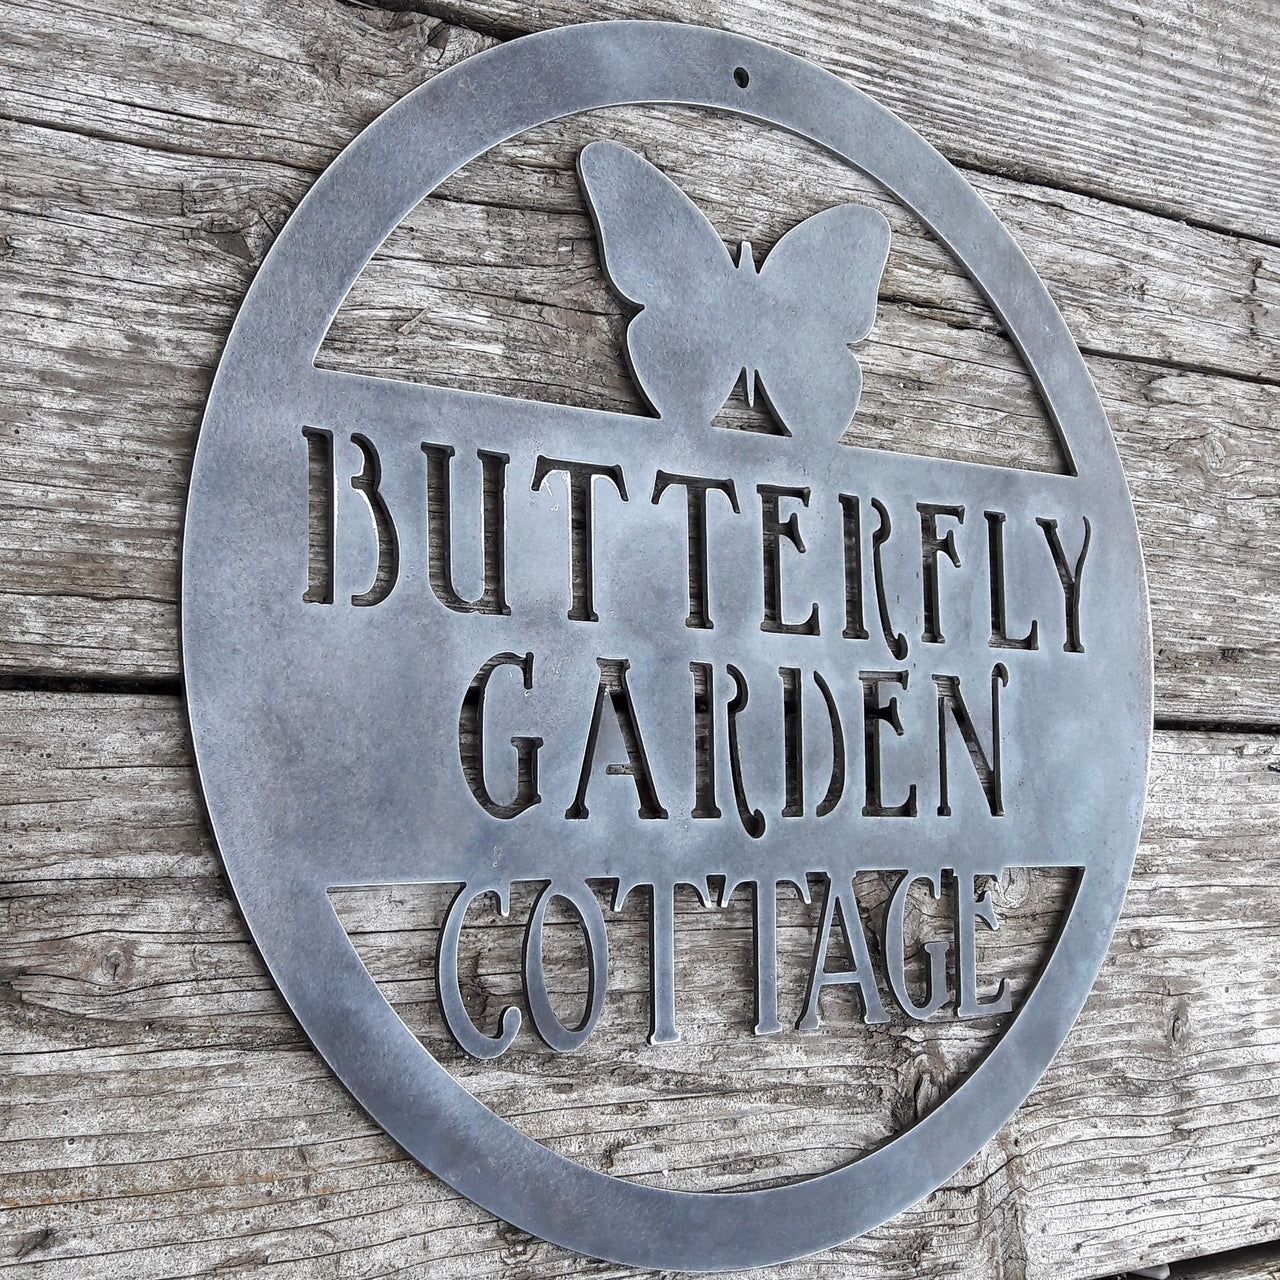 Round metal sign with the image of a Butterfly at the top and three lines of text. The sign reads, " Butterfly Garden Cottage".